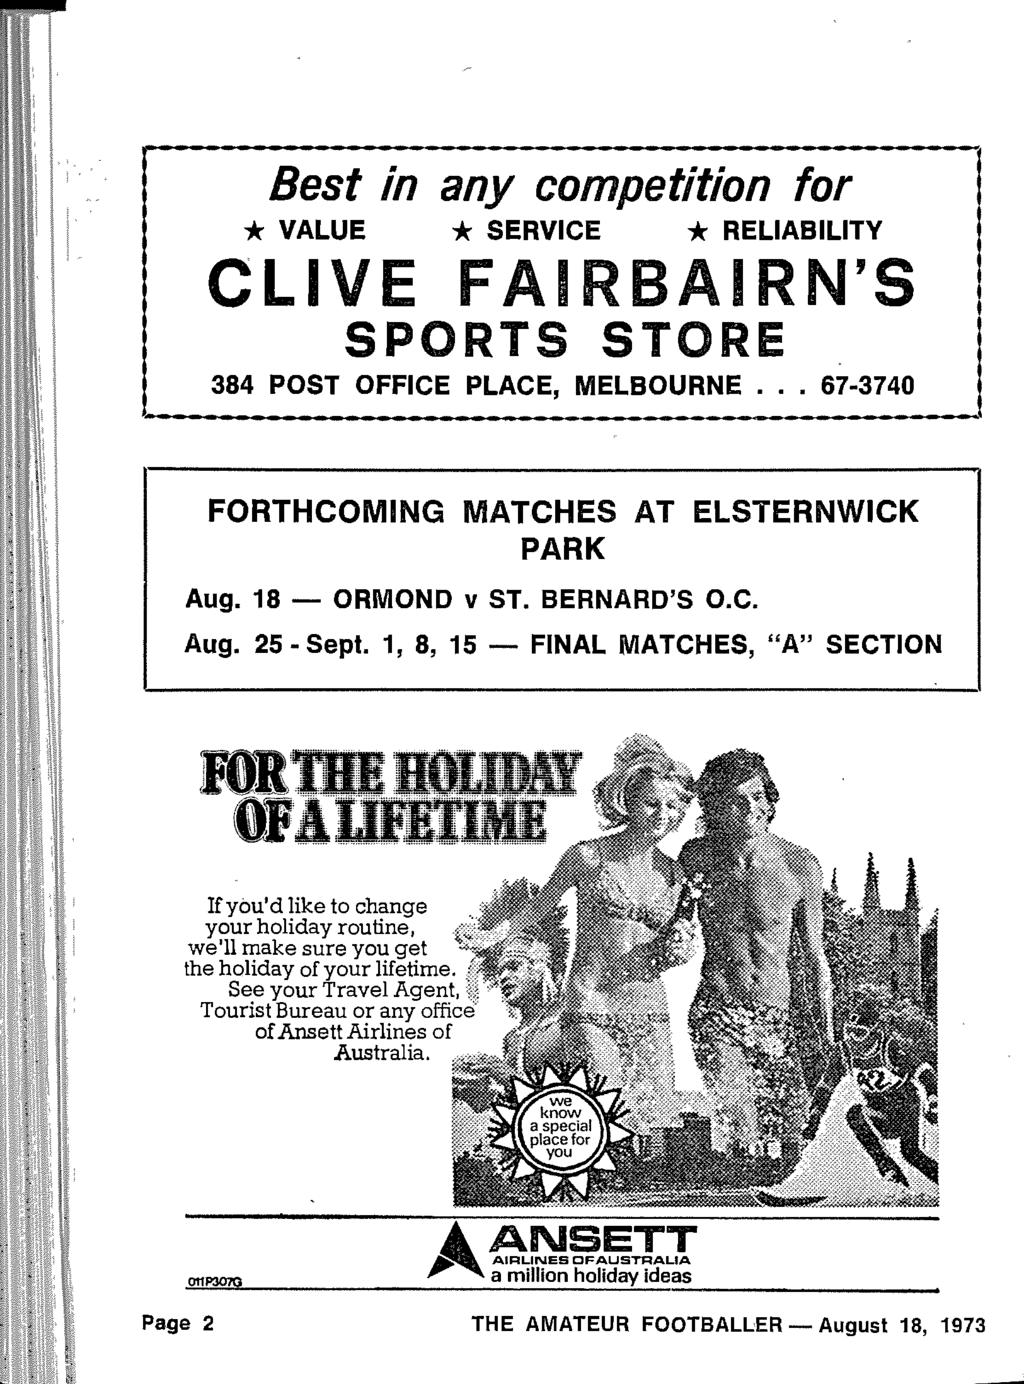 Best in any competition for * VALUE * SERVICE * RELIABILITY C L' FAIRBAIRN' S SPORTS STOR E 384 POST OFFICE PLACE, MELBOURNE... 67-374 0 FORTHCOMING MATCHES AT ELSTERNWICK PARK Aug. 18 - ORMOND v ST.